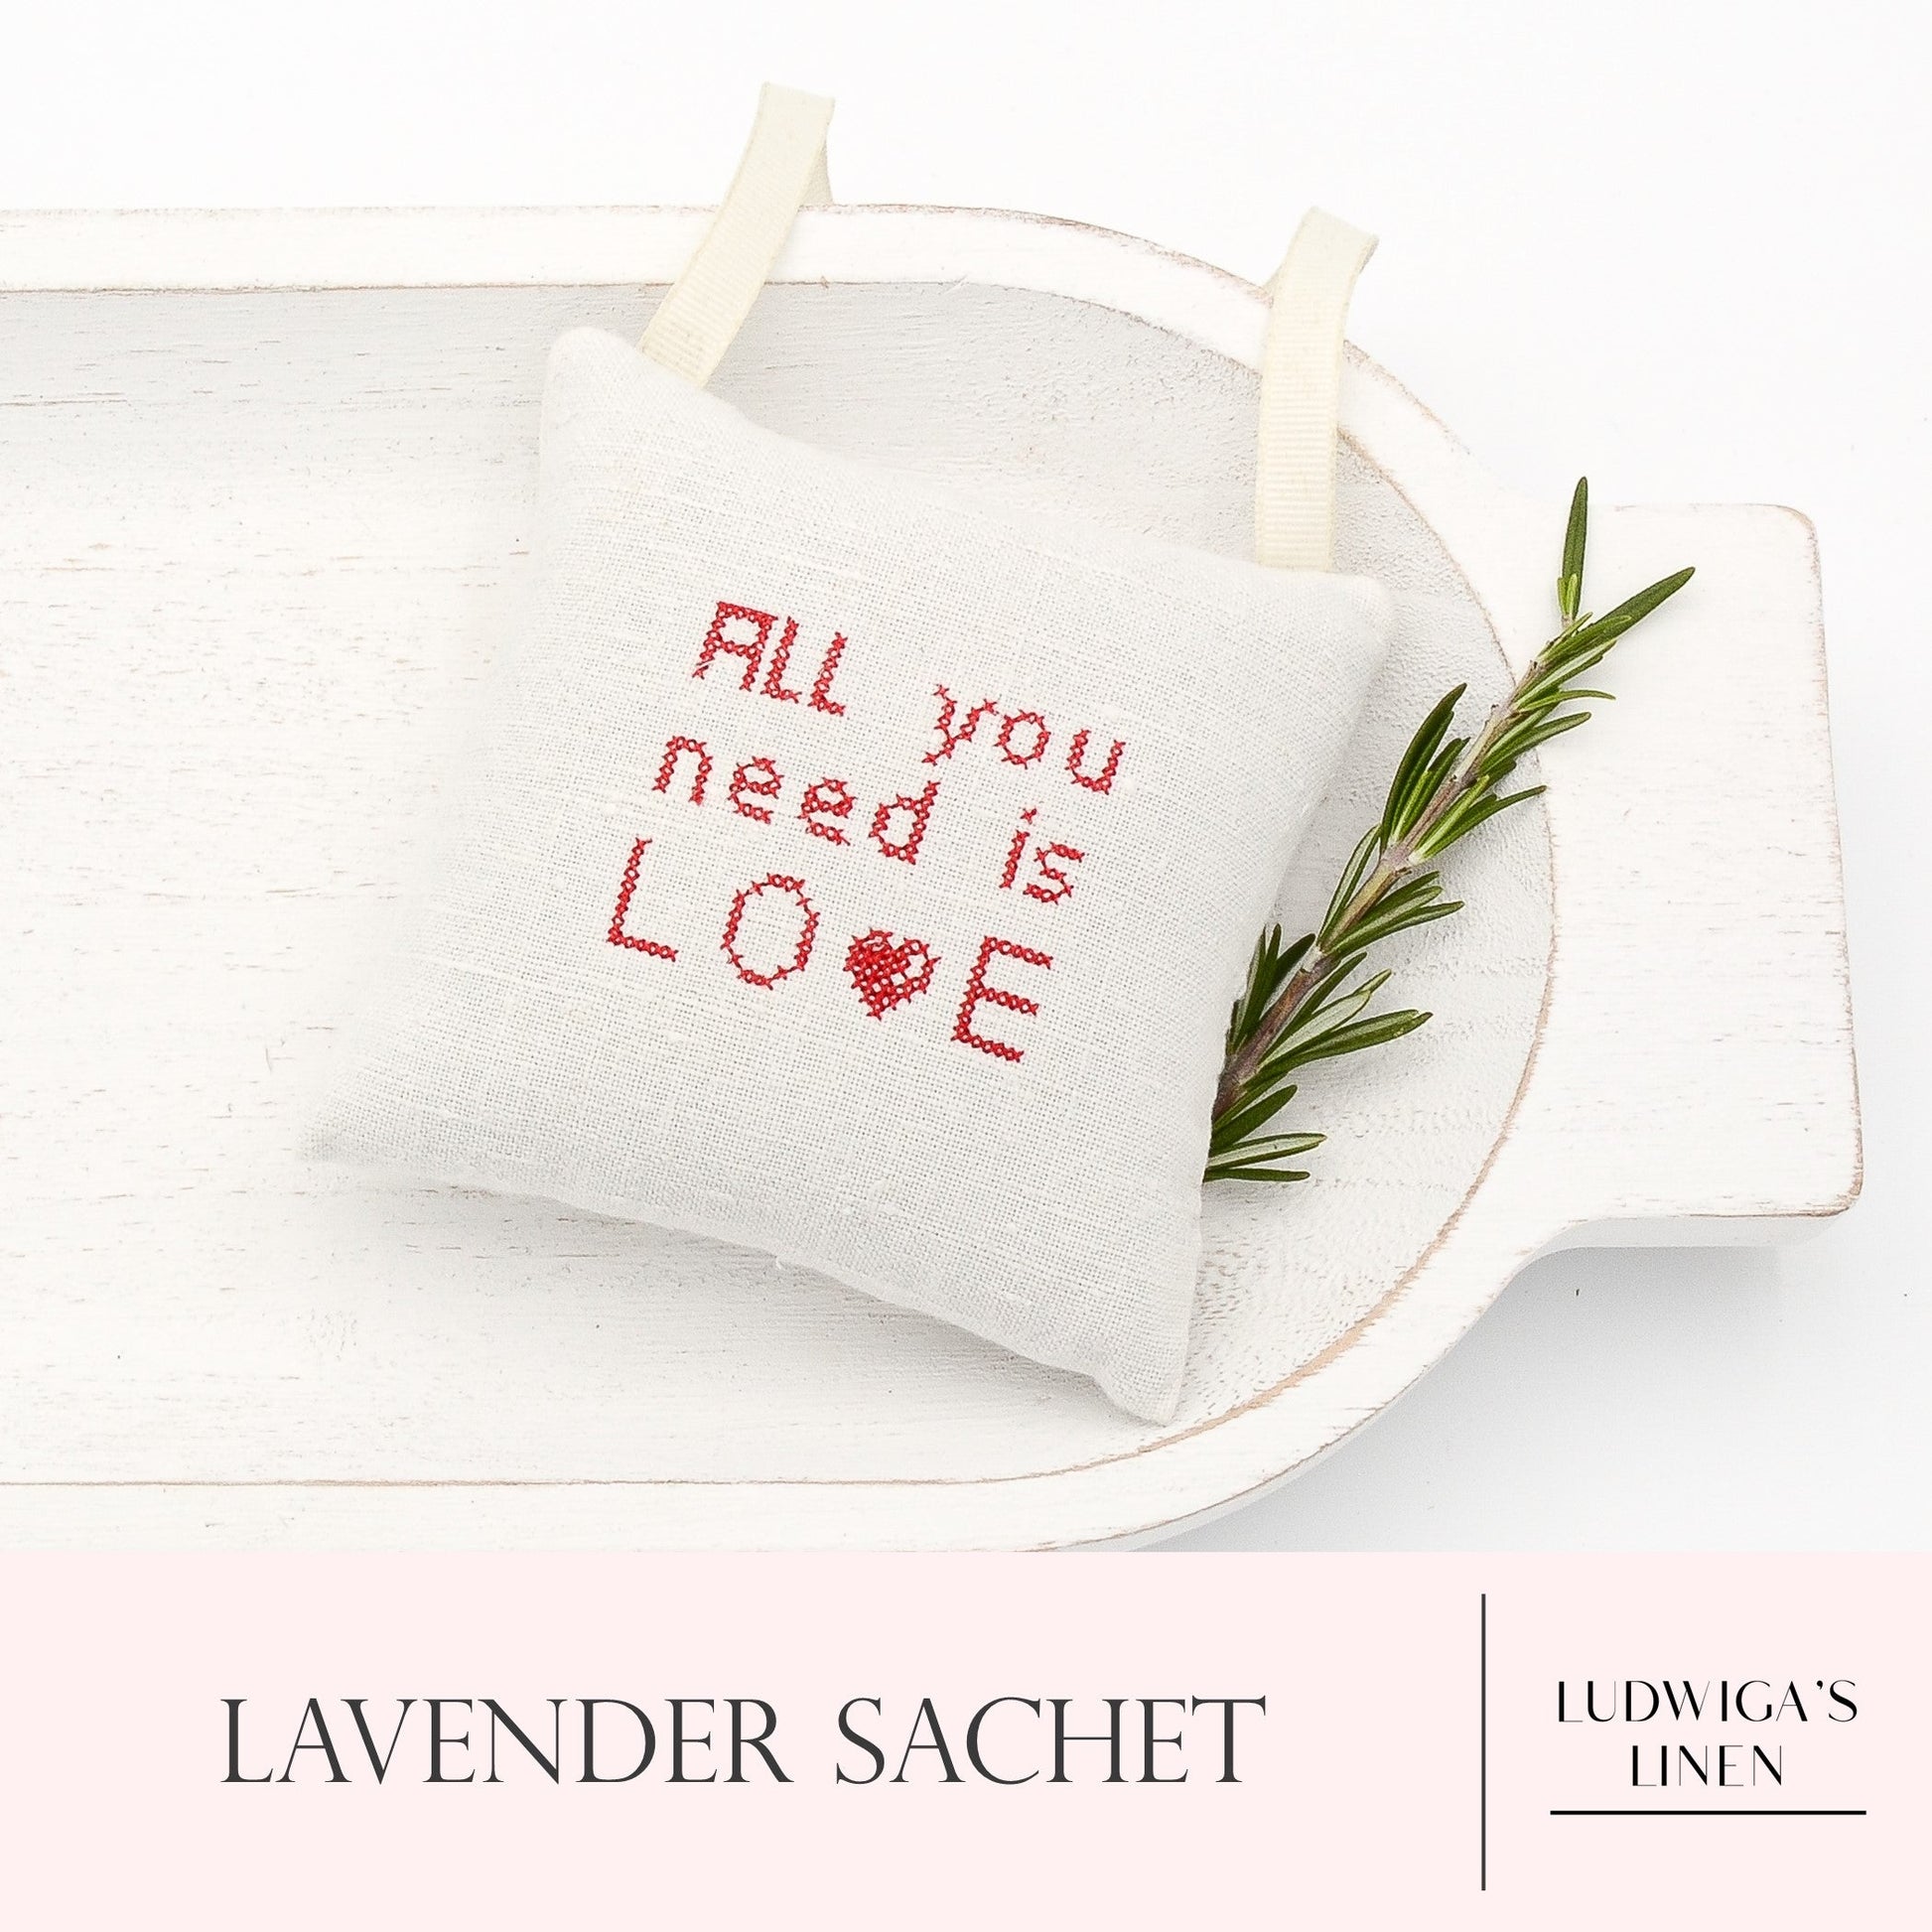 Antique/vintage European white linen lavender sachet square with "all you need is love" embroidered in red, gros grain ribbon tie and filled with high quality lavender from Provence France